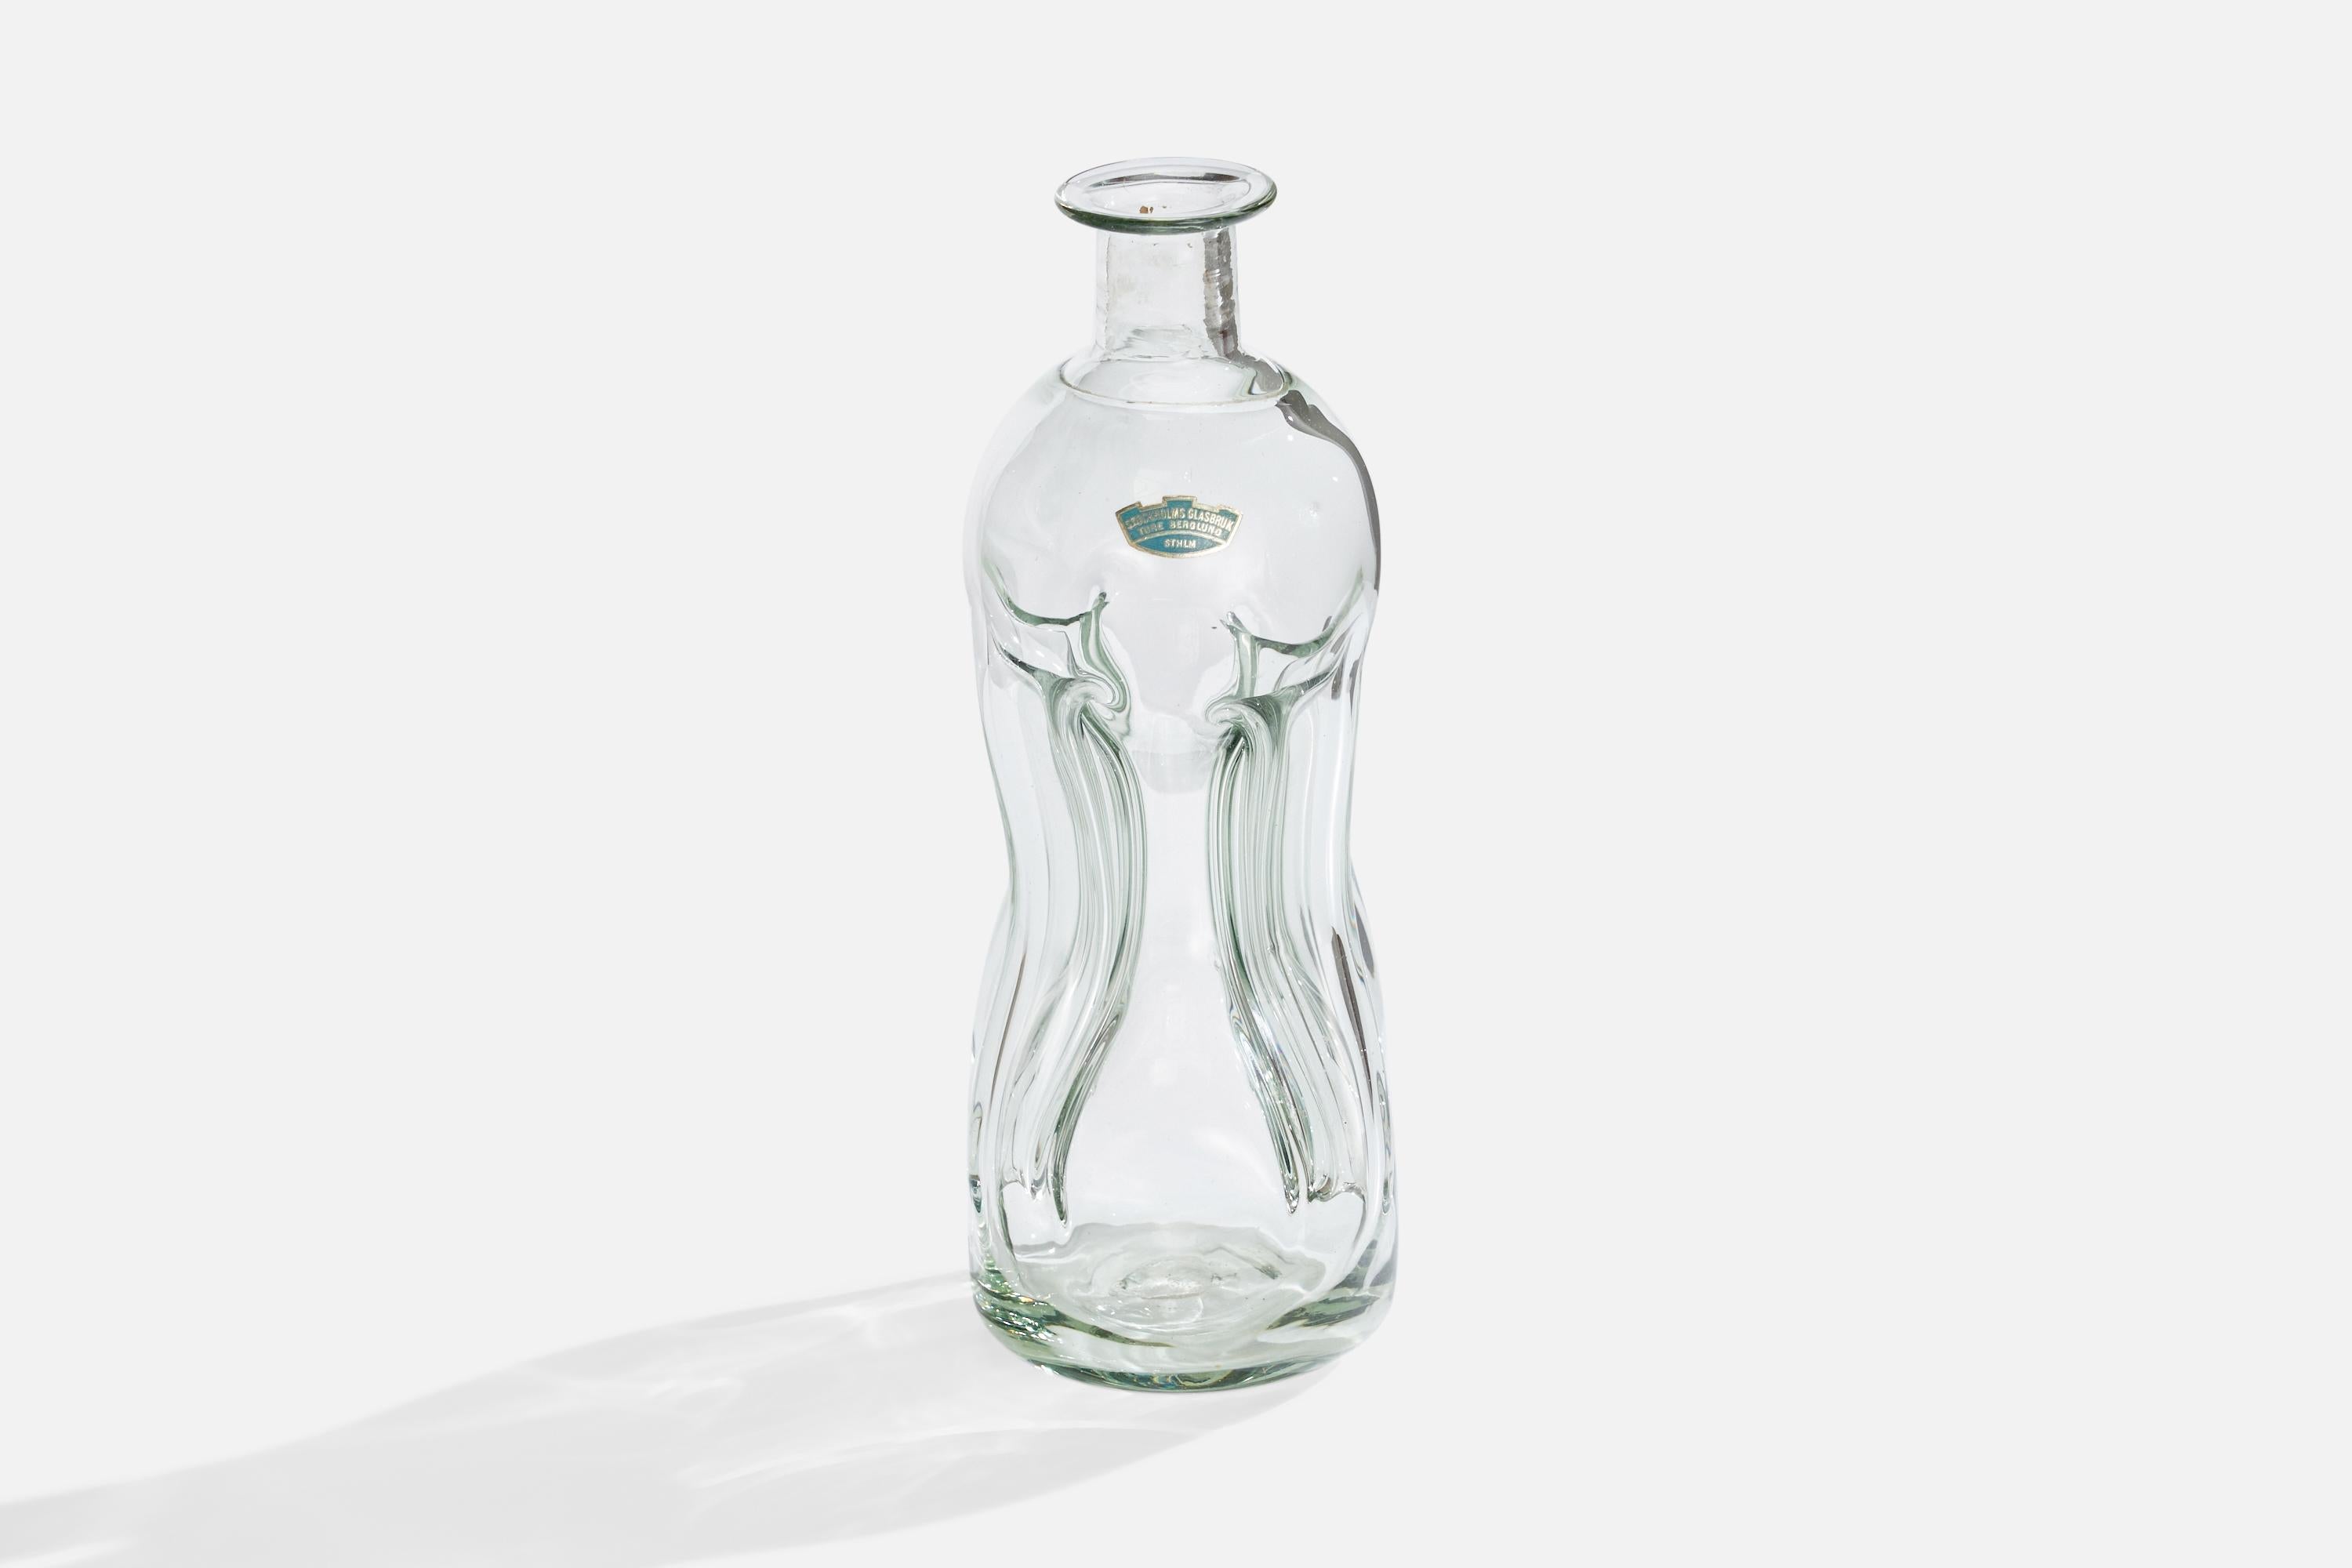 A blown glass bottle designed by Ture Berglund and produced by Skansens Glasbruk, Sweden, 1940s.